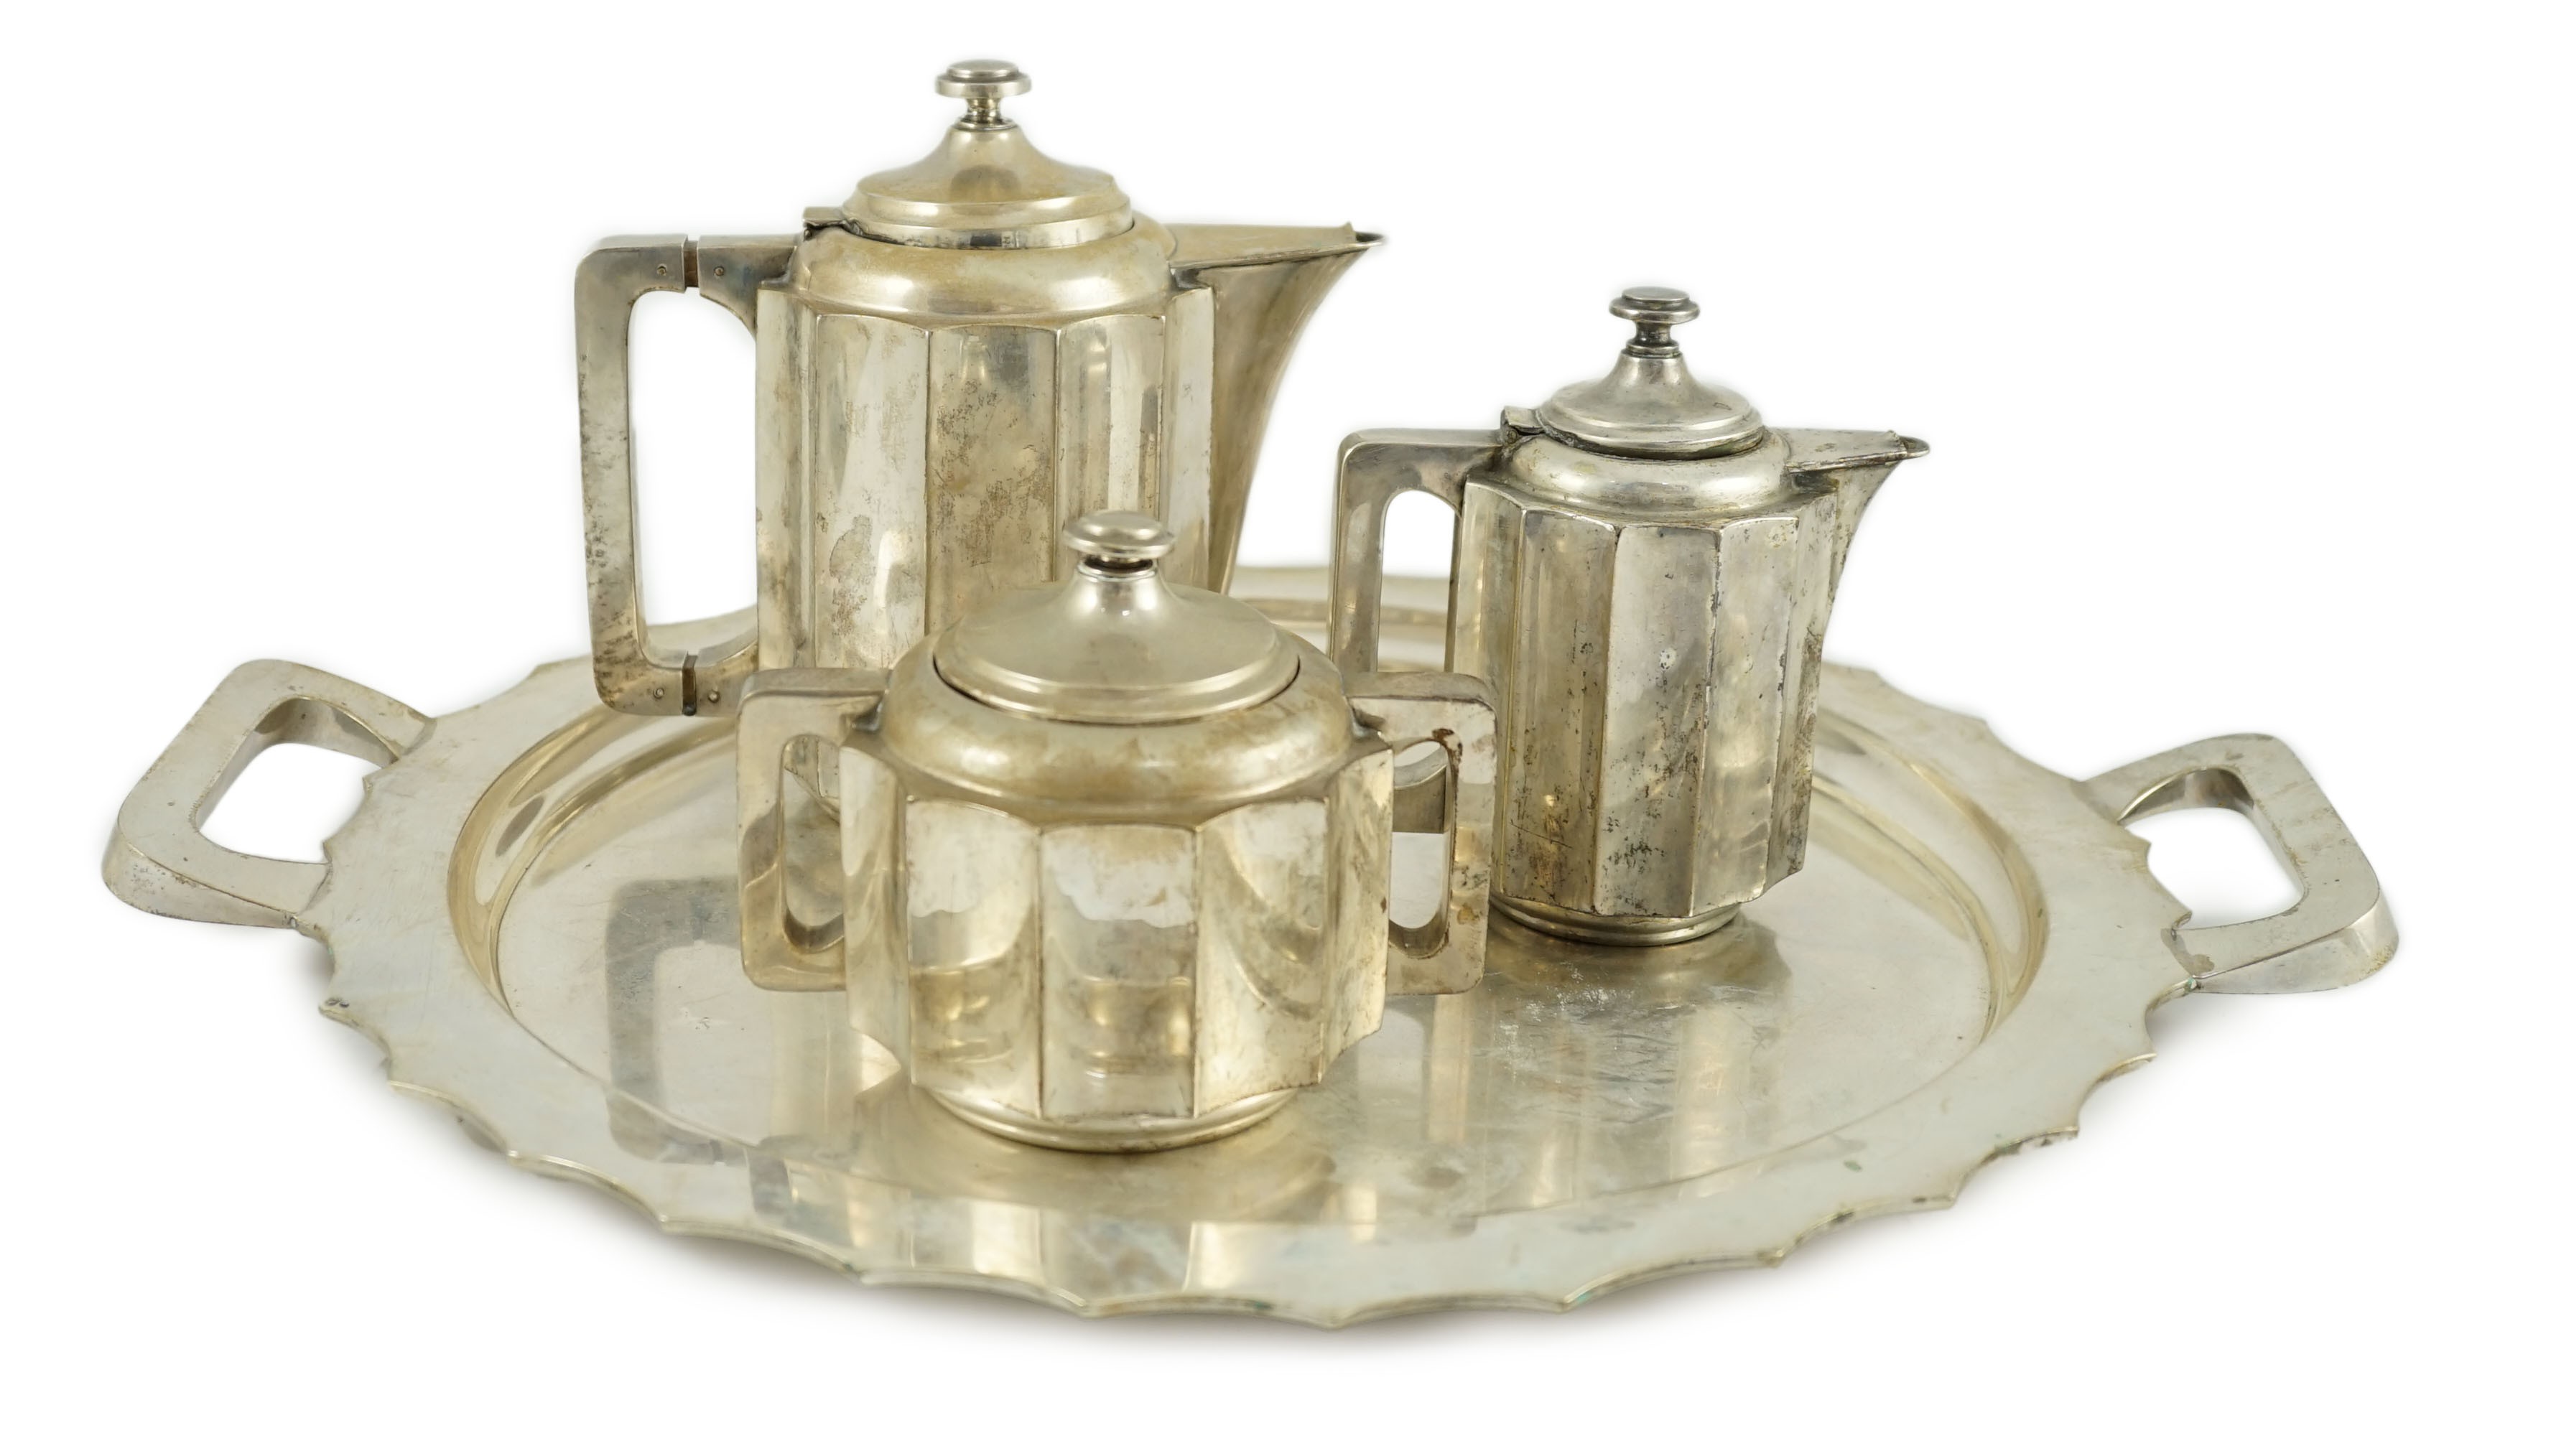 A 20th century Portuguese Art Deco three piece 833 standard silver tea set with two handled tea tray